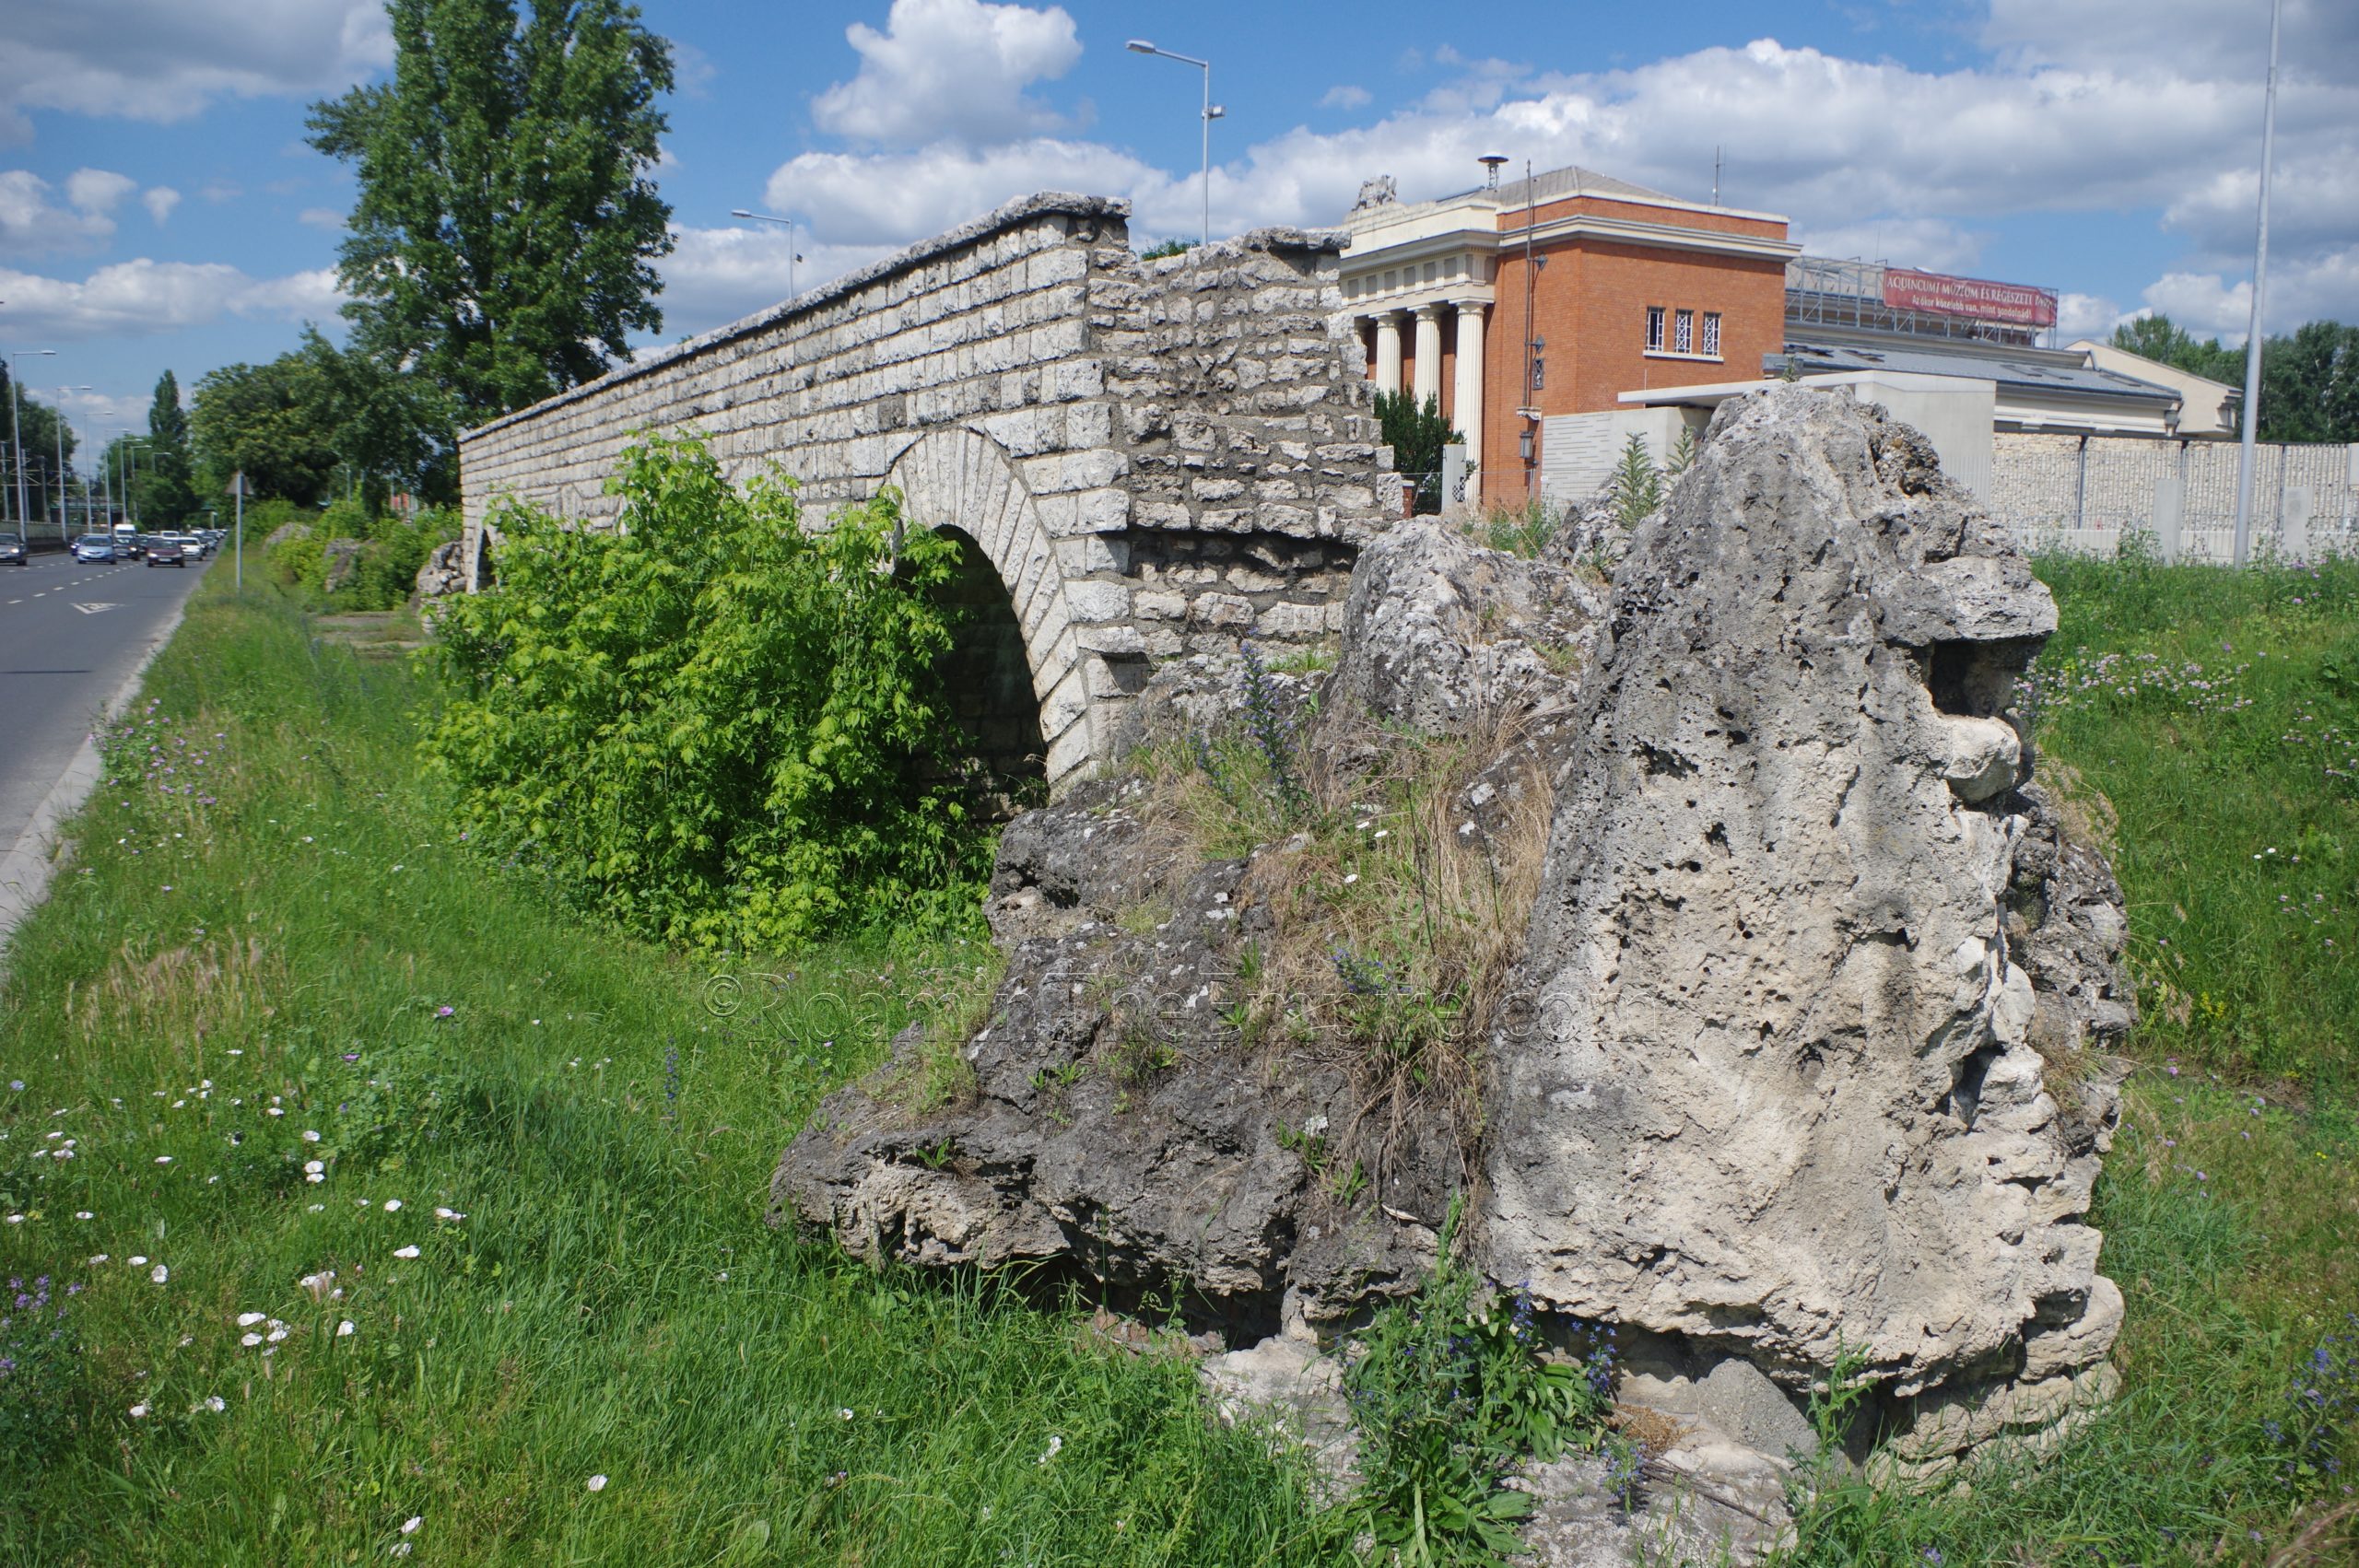 Remains and reconstruction of the aqueduct in the median of Szentendrei út near the Záhony utca intersection. Aquincum.